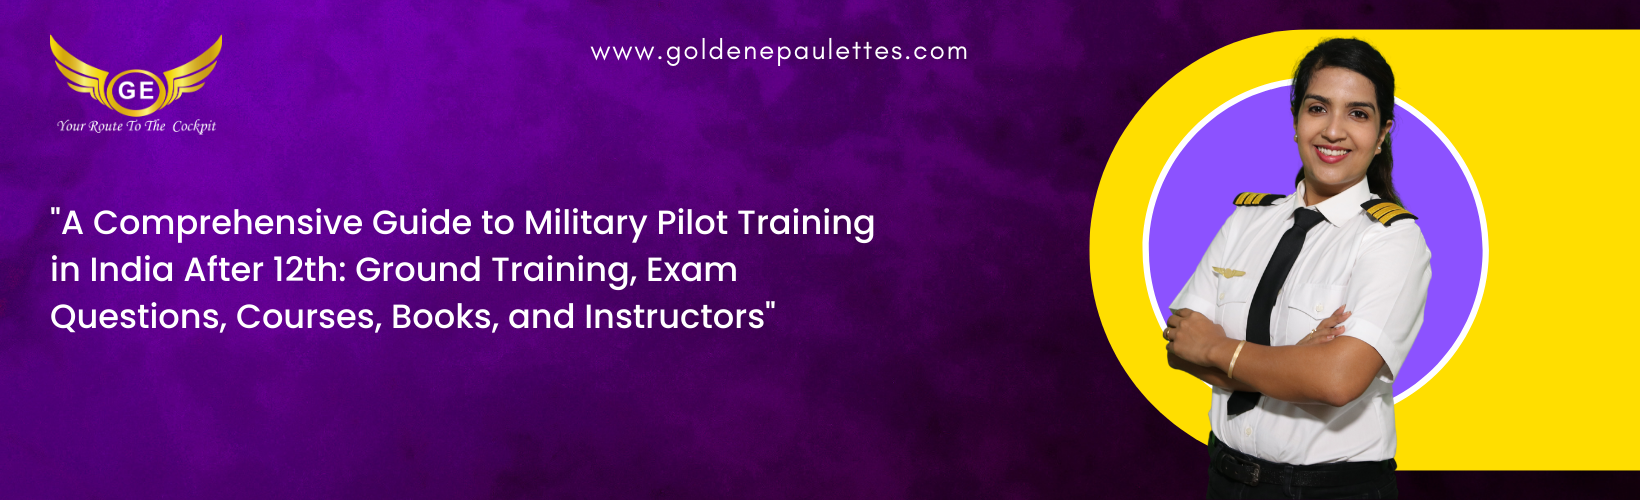 Military Pilot Training in India After 12th